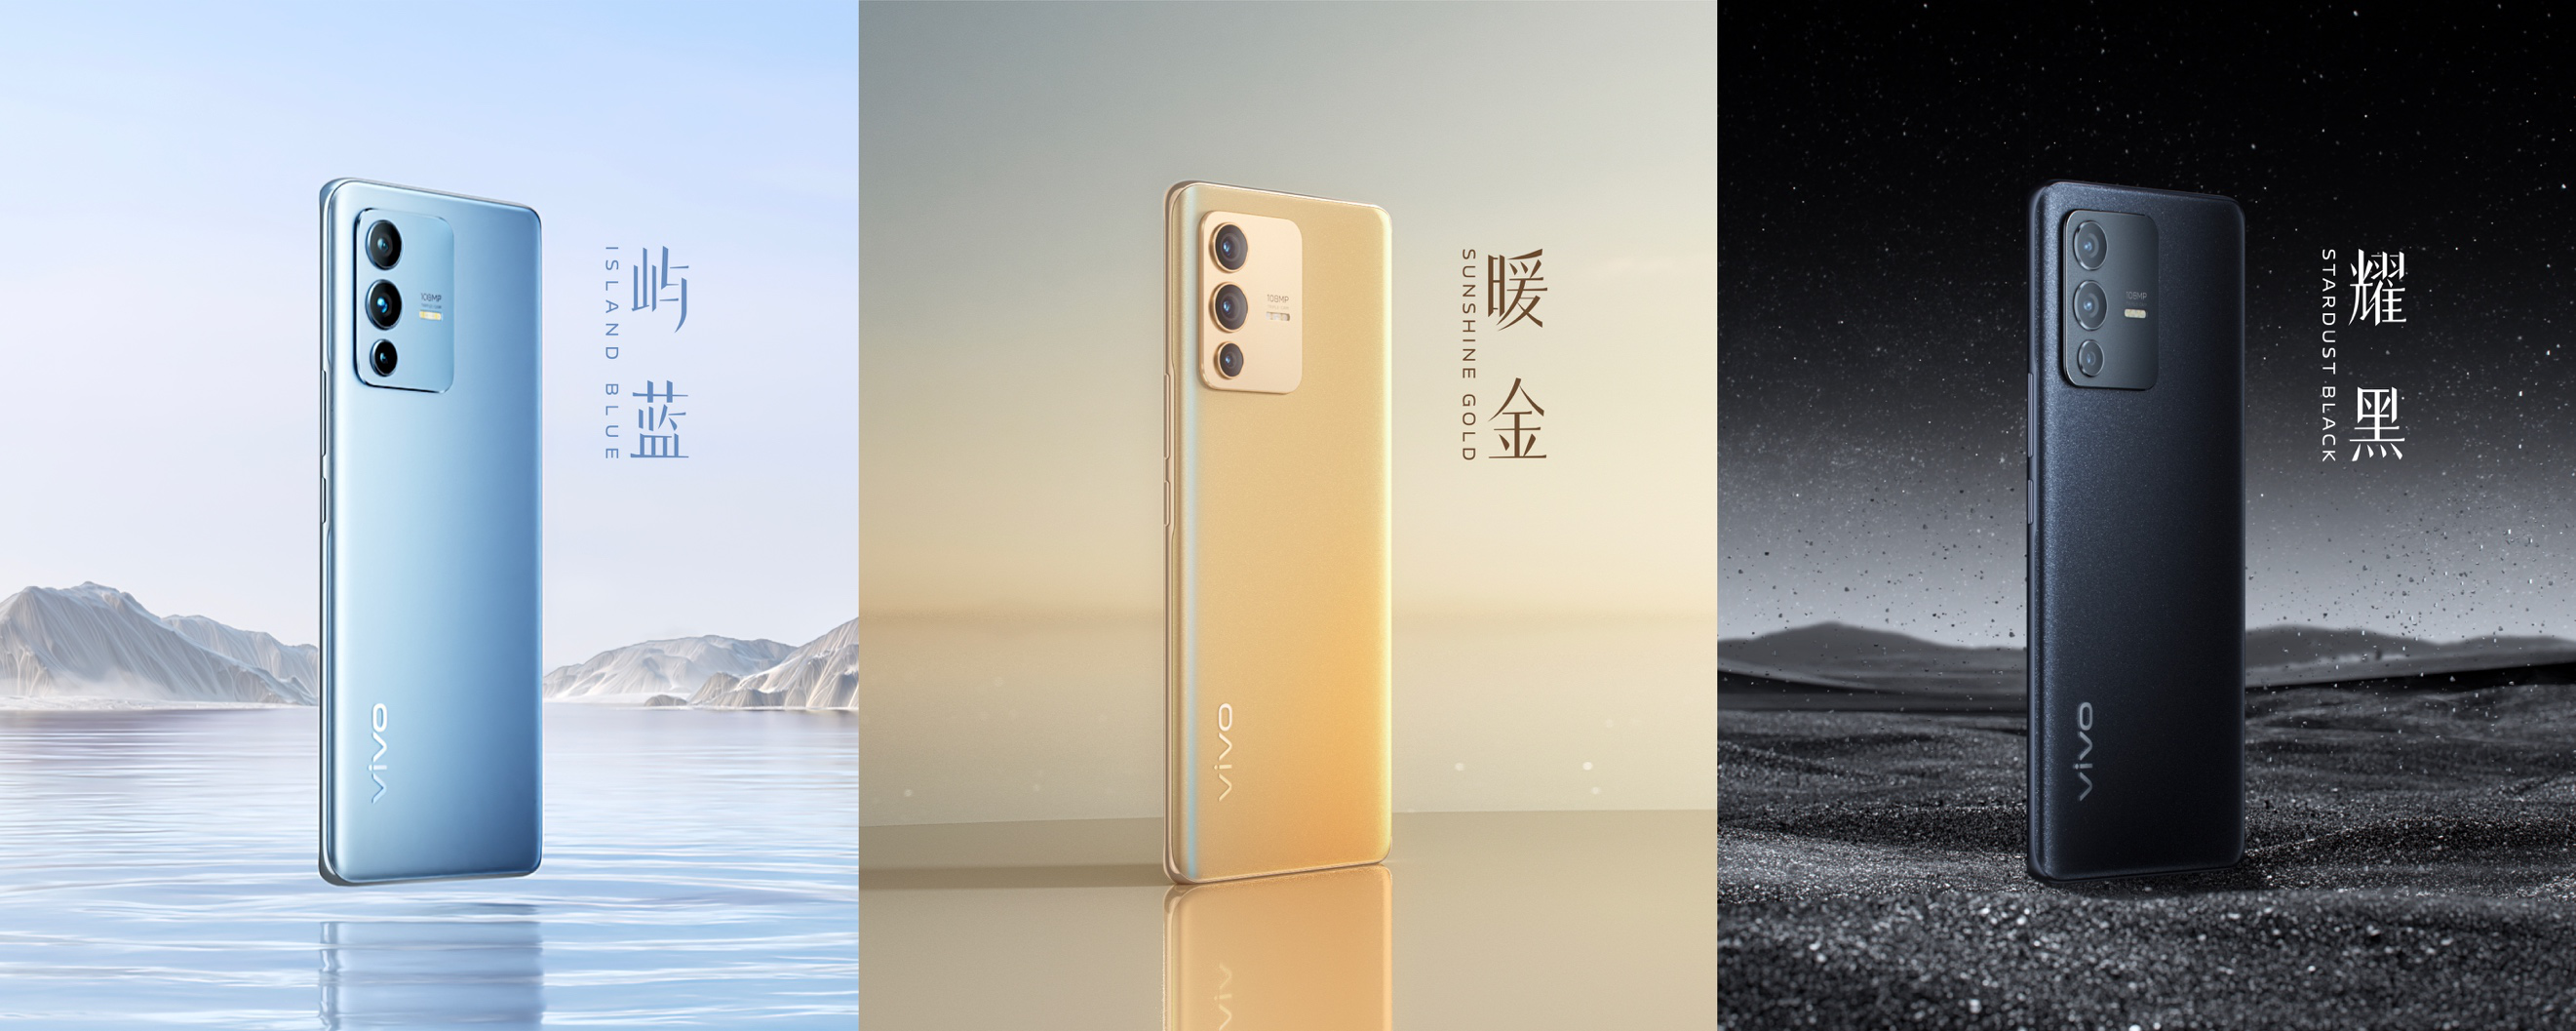 Forefront | vivo S12 series imaging flagship mobile phone released, priced from 2799 yuan add/titleonlydetailed interpretation add/titleonlylatest information add/titleonlyhot events add/titleonly36氪 | v2 f711ed2c8da94bdd858b59f82bdafe49 img png